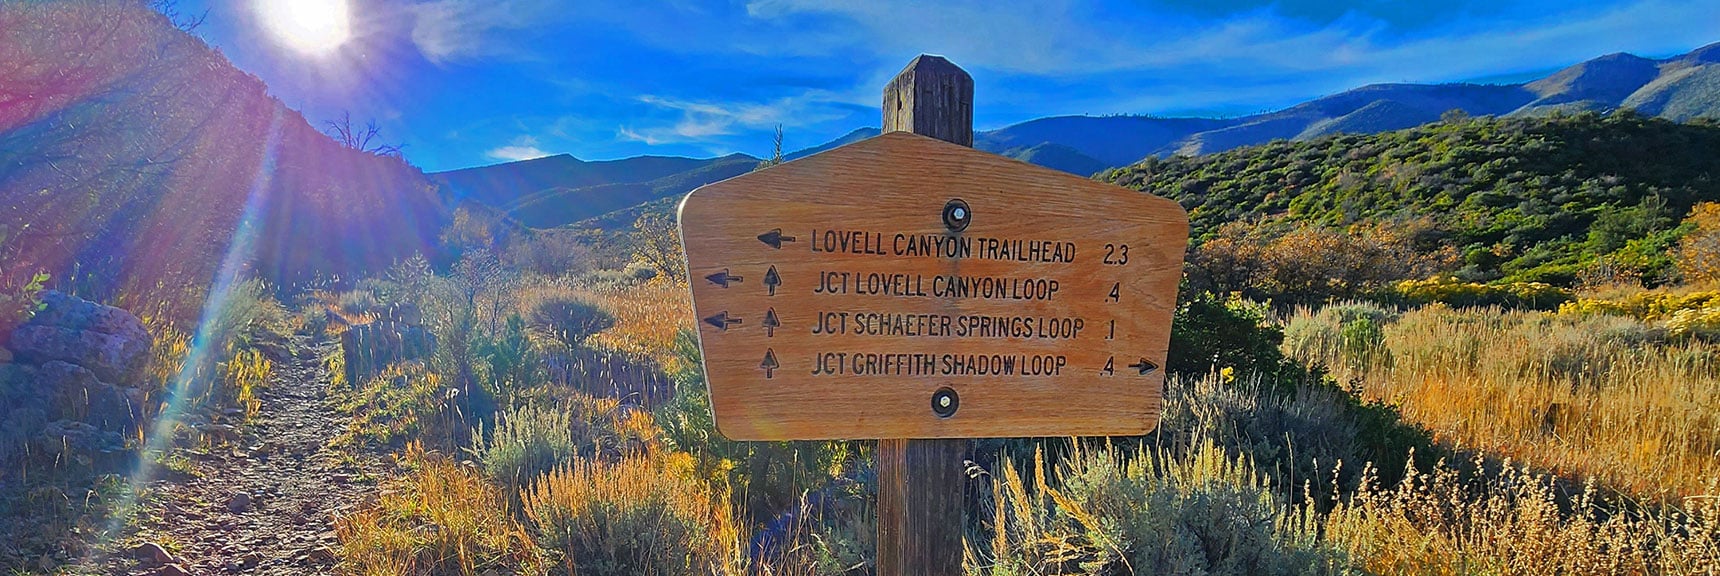 Now on West Side of Canyon. Trail Sign Lists Choices Here. Heading for Trailhead. | Griffith Shadow Loop | Lovell Canyon, Nevada